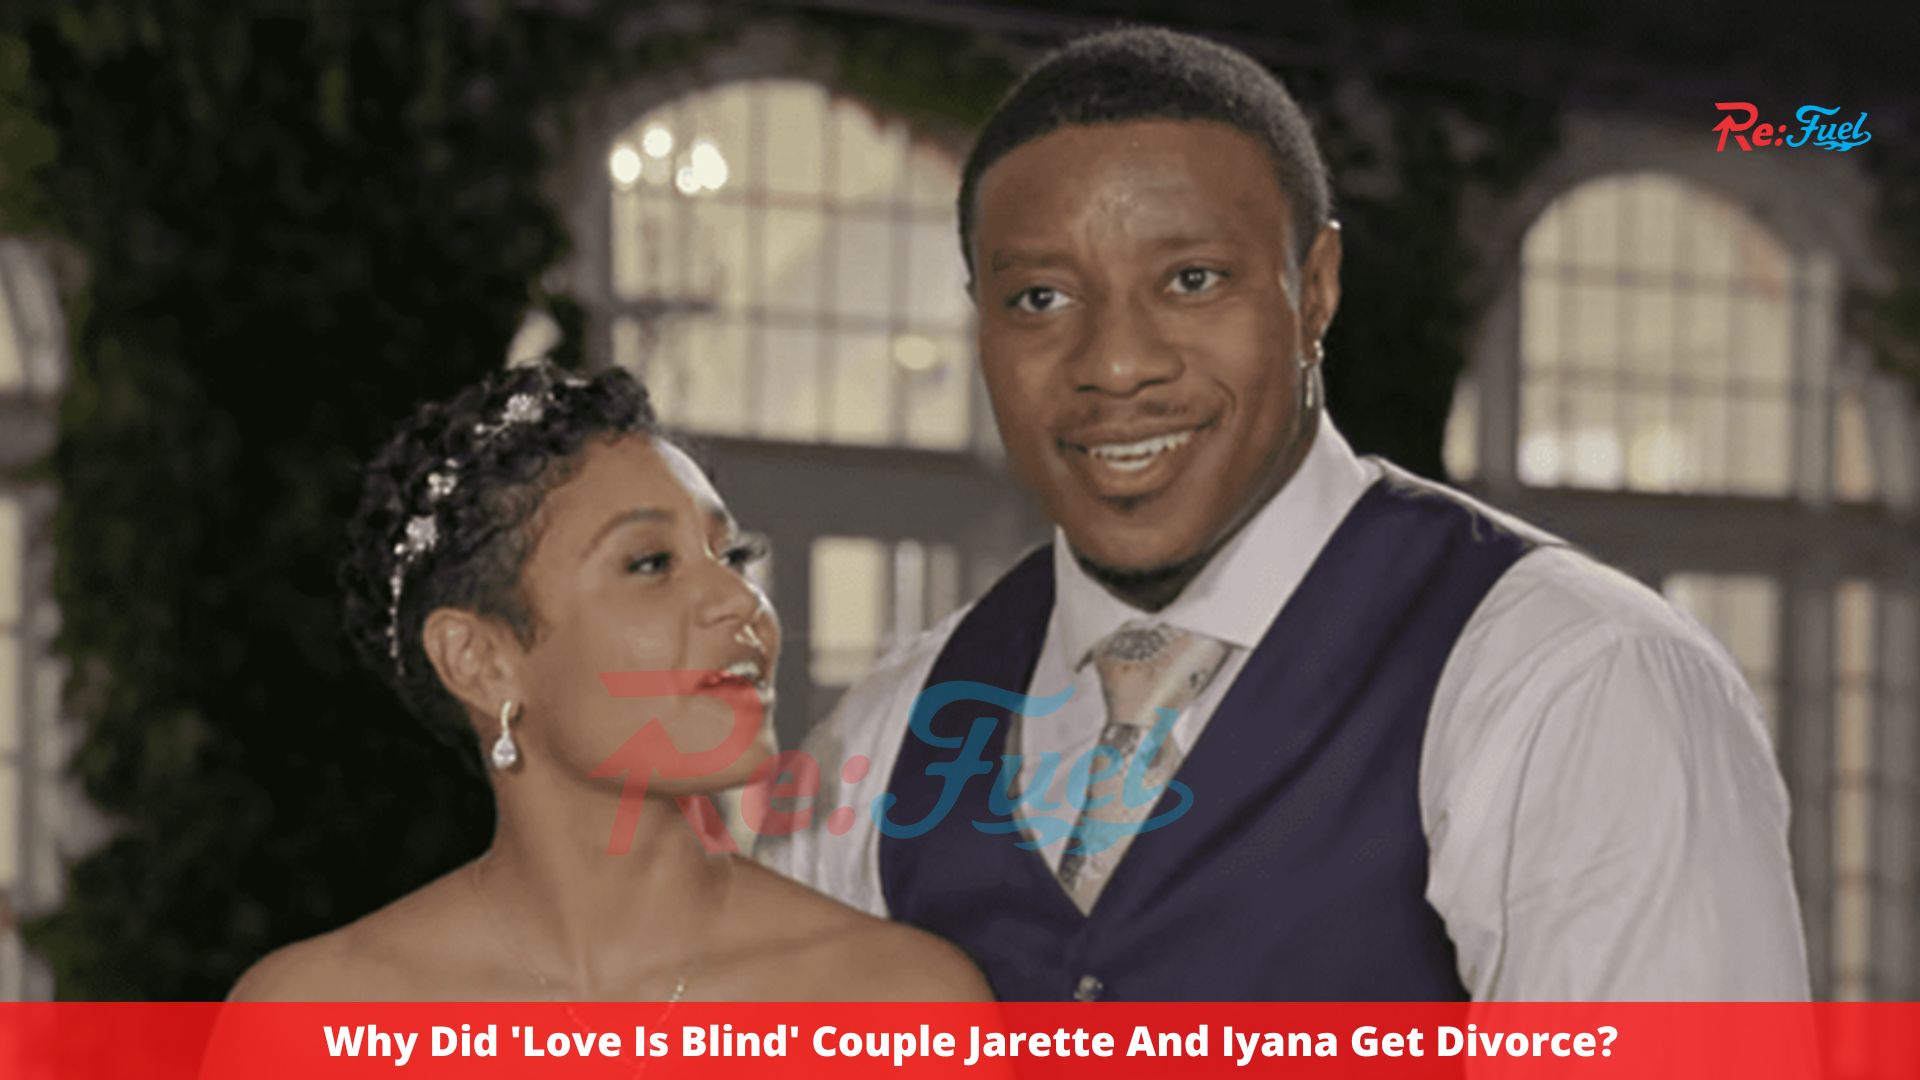 Why Did 'Love Is Blind' Couple Jarette And Iyana Get Divorce?Why Did 'Love Is Blind' Couple Jarette And Iyana Get Divorce?